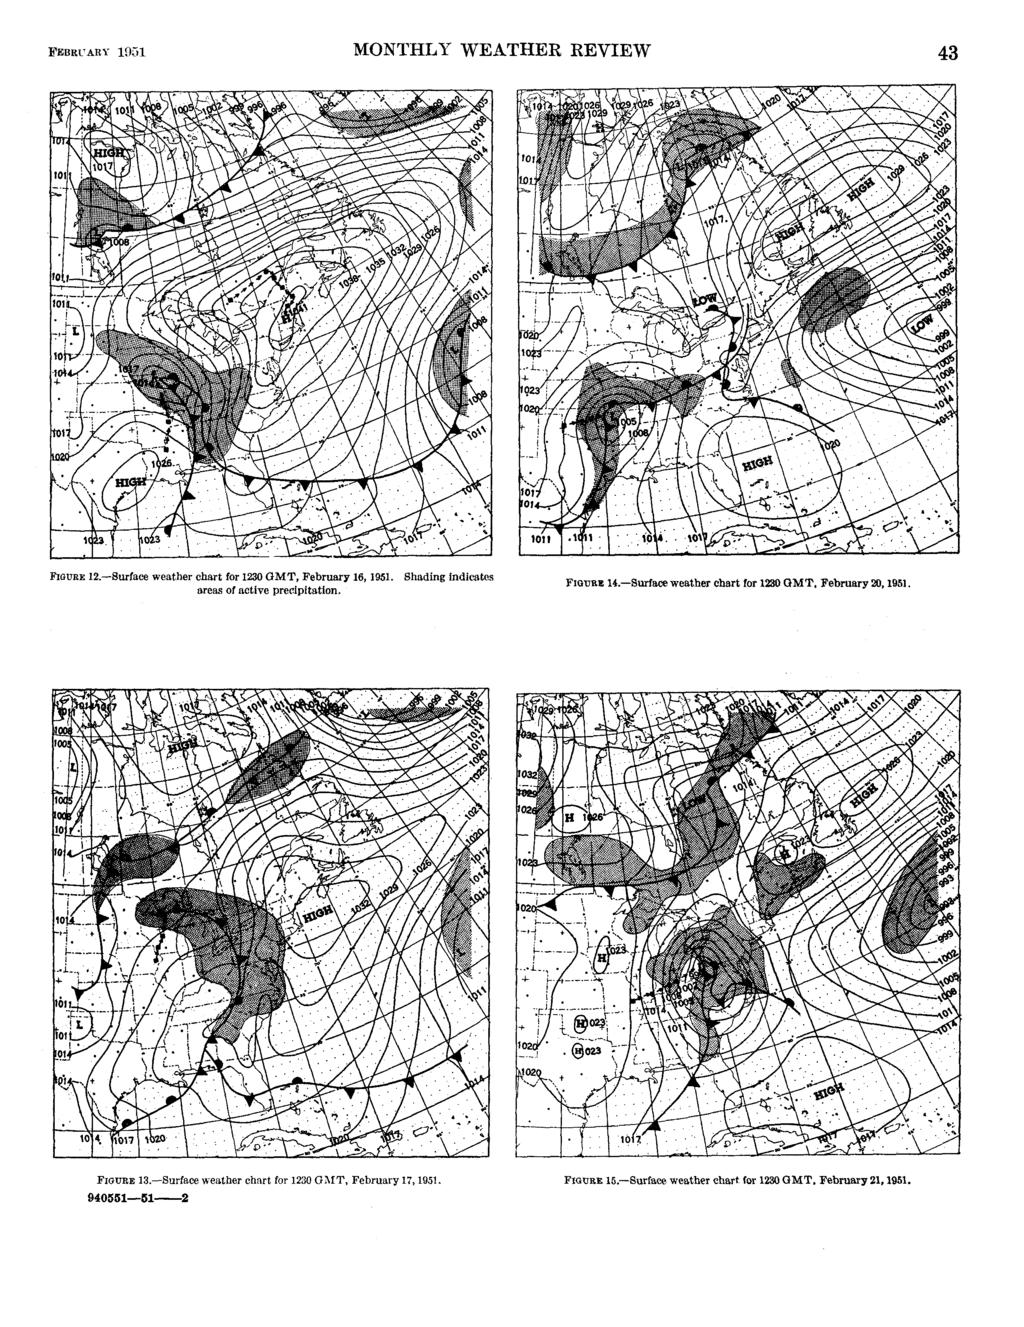 FEBKL-ARY 1051 MONTHLY WEATHER REVIEW 43 FIQURE 12.-Surface weather chart for 1230 QMT, February 16, 1951. areas of active precipitation. Shading indieatas FIGURE 14.